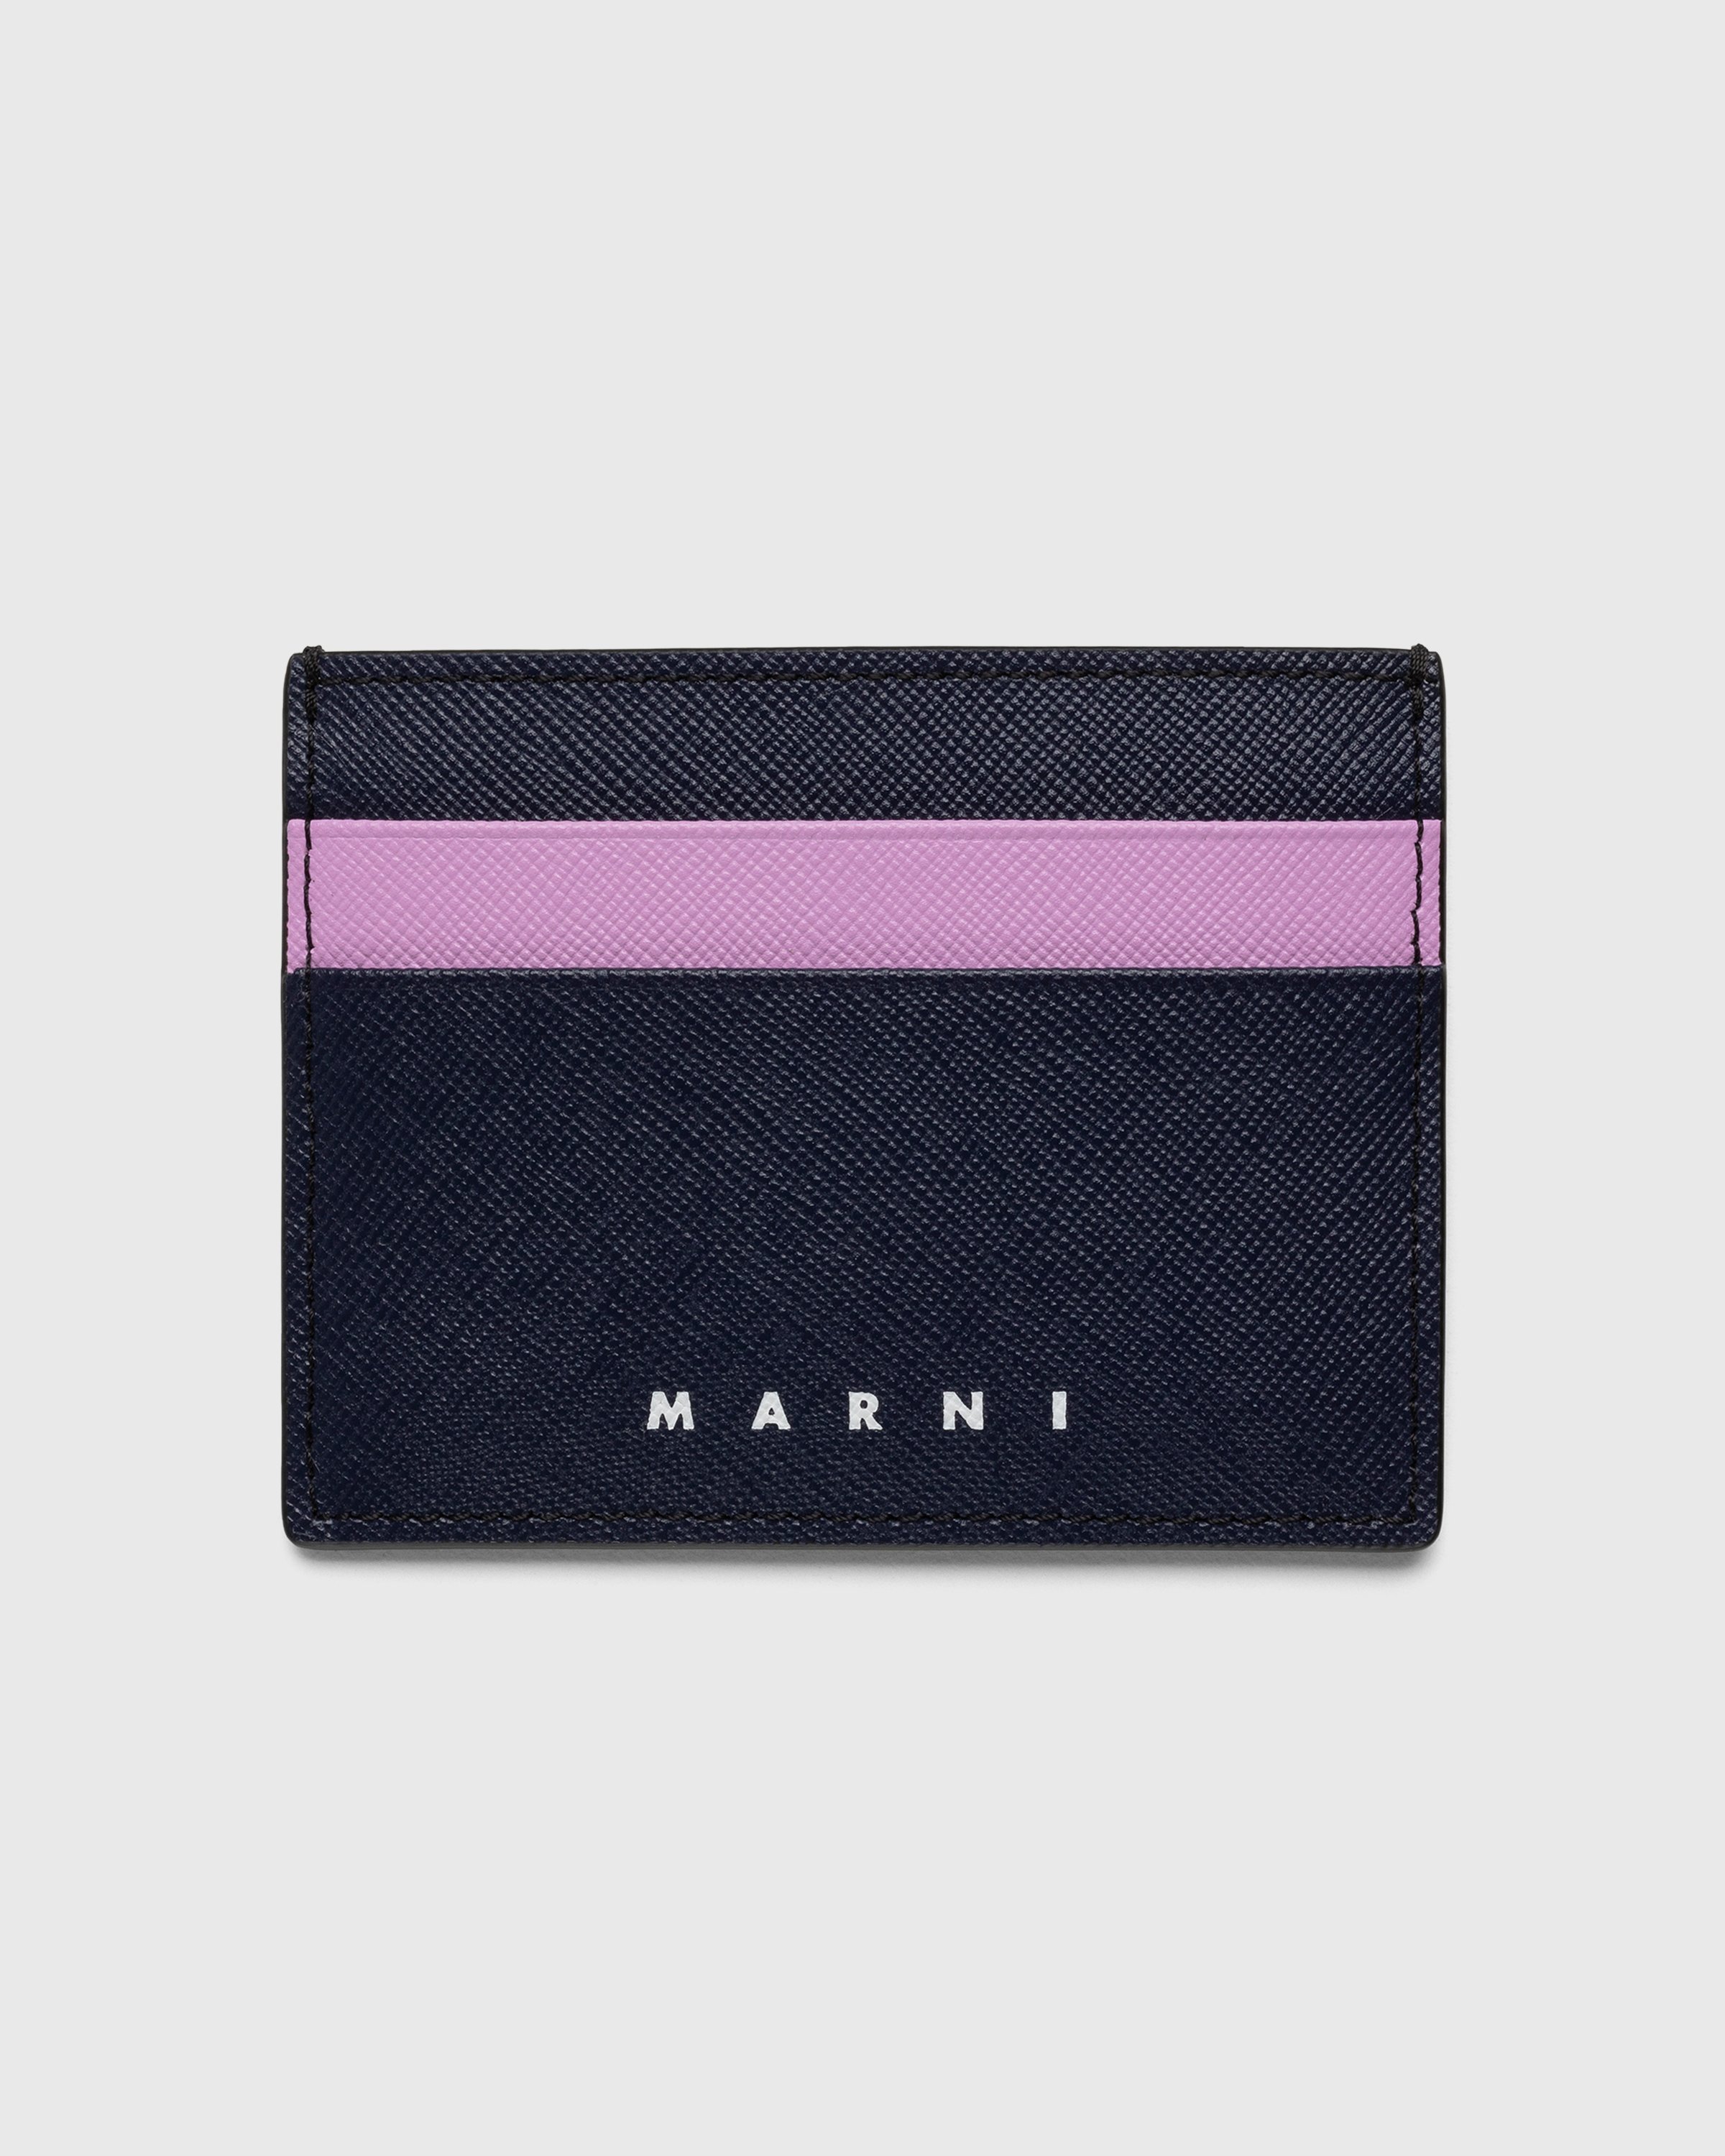 Marni - Leather Card Holder Blue Black/Pink Candy - Accessories - Blublack/Pink Candy - Image 1